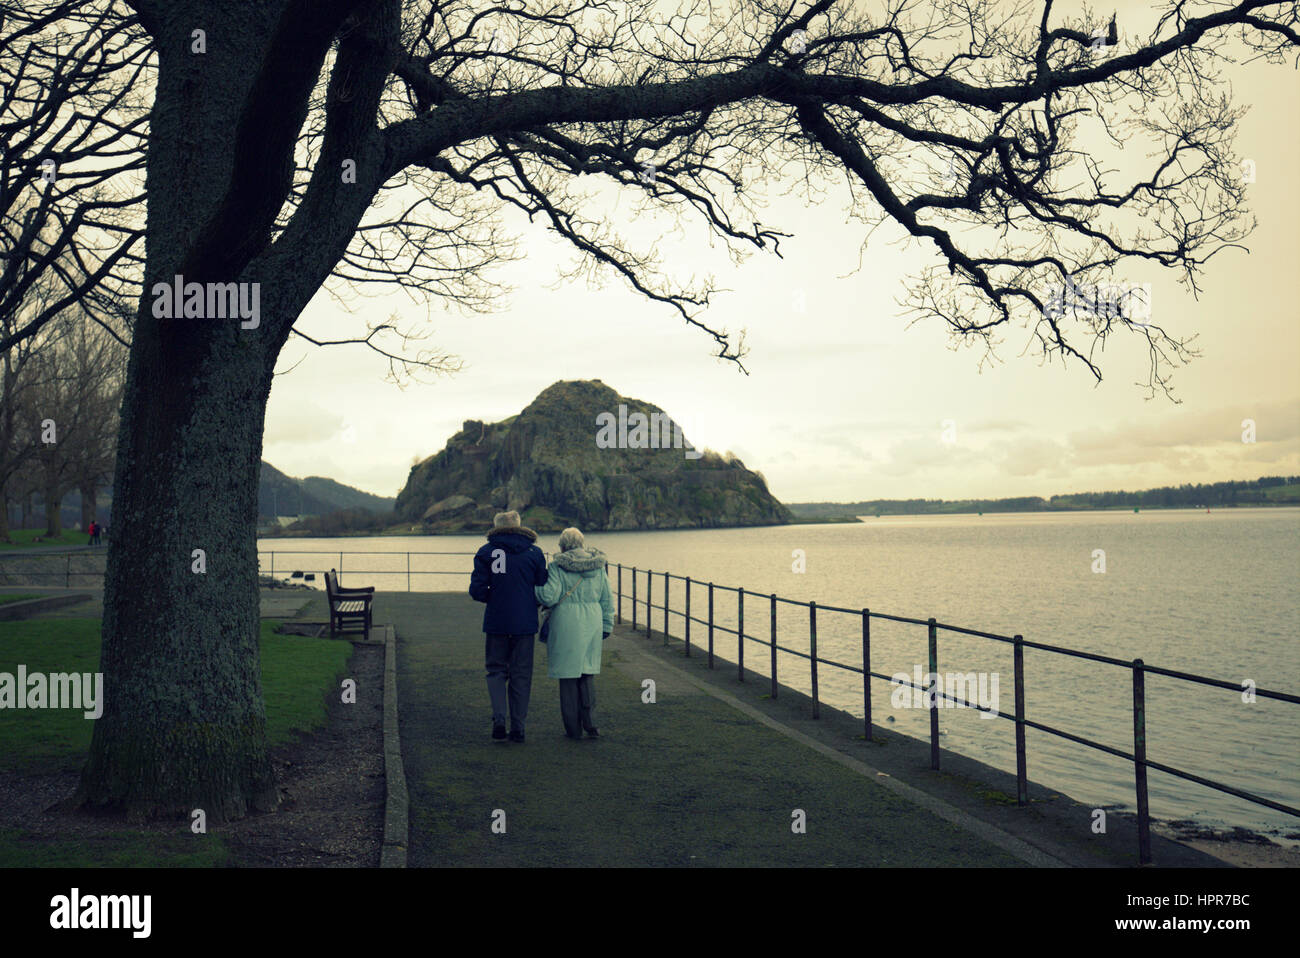 Dumbarton castle rock viewed from the shore at leven park old couple walking Stock Photo